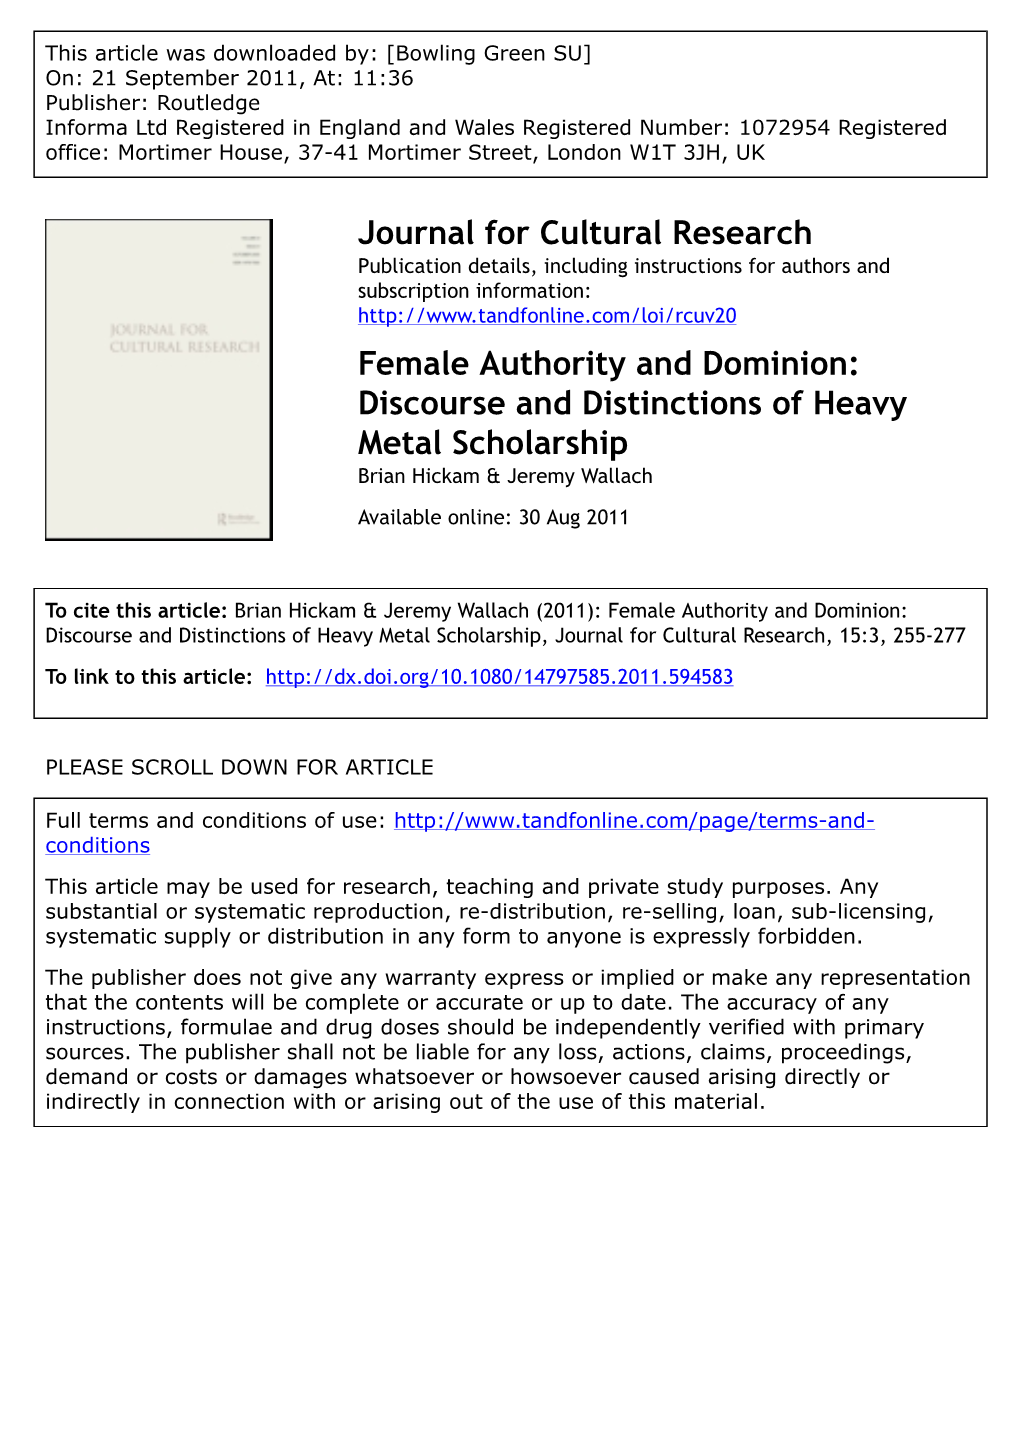 Discourse and Distinctions of Heavy Metal Scholarship Brian Hickam & Jeremy Wallach Available Online: 30 Aug 2011